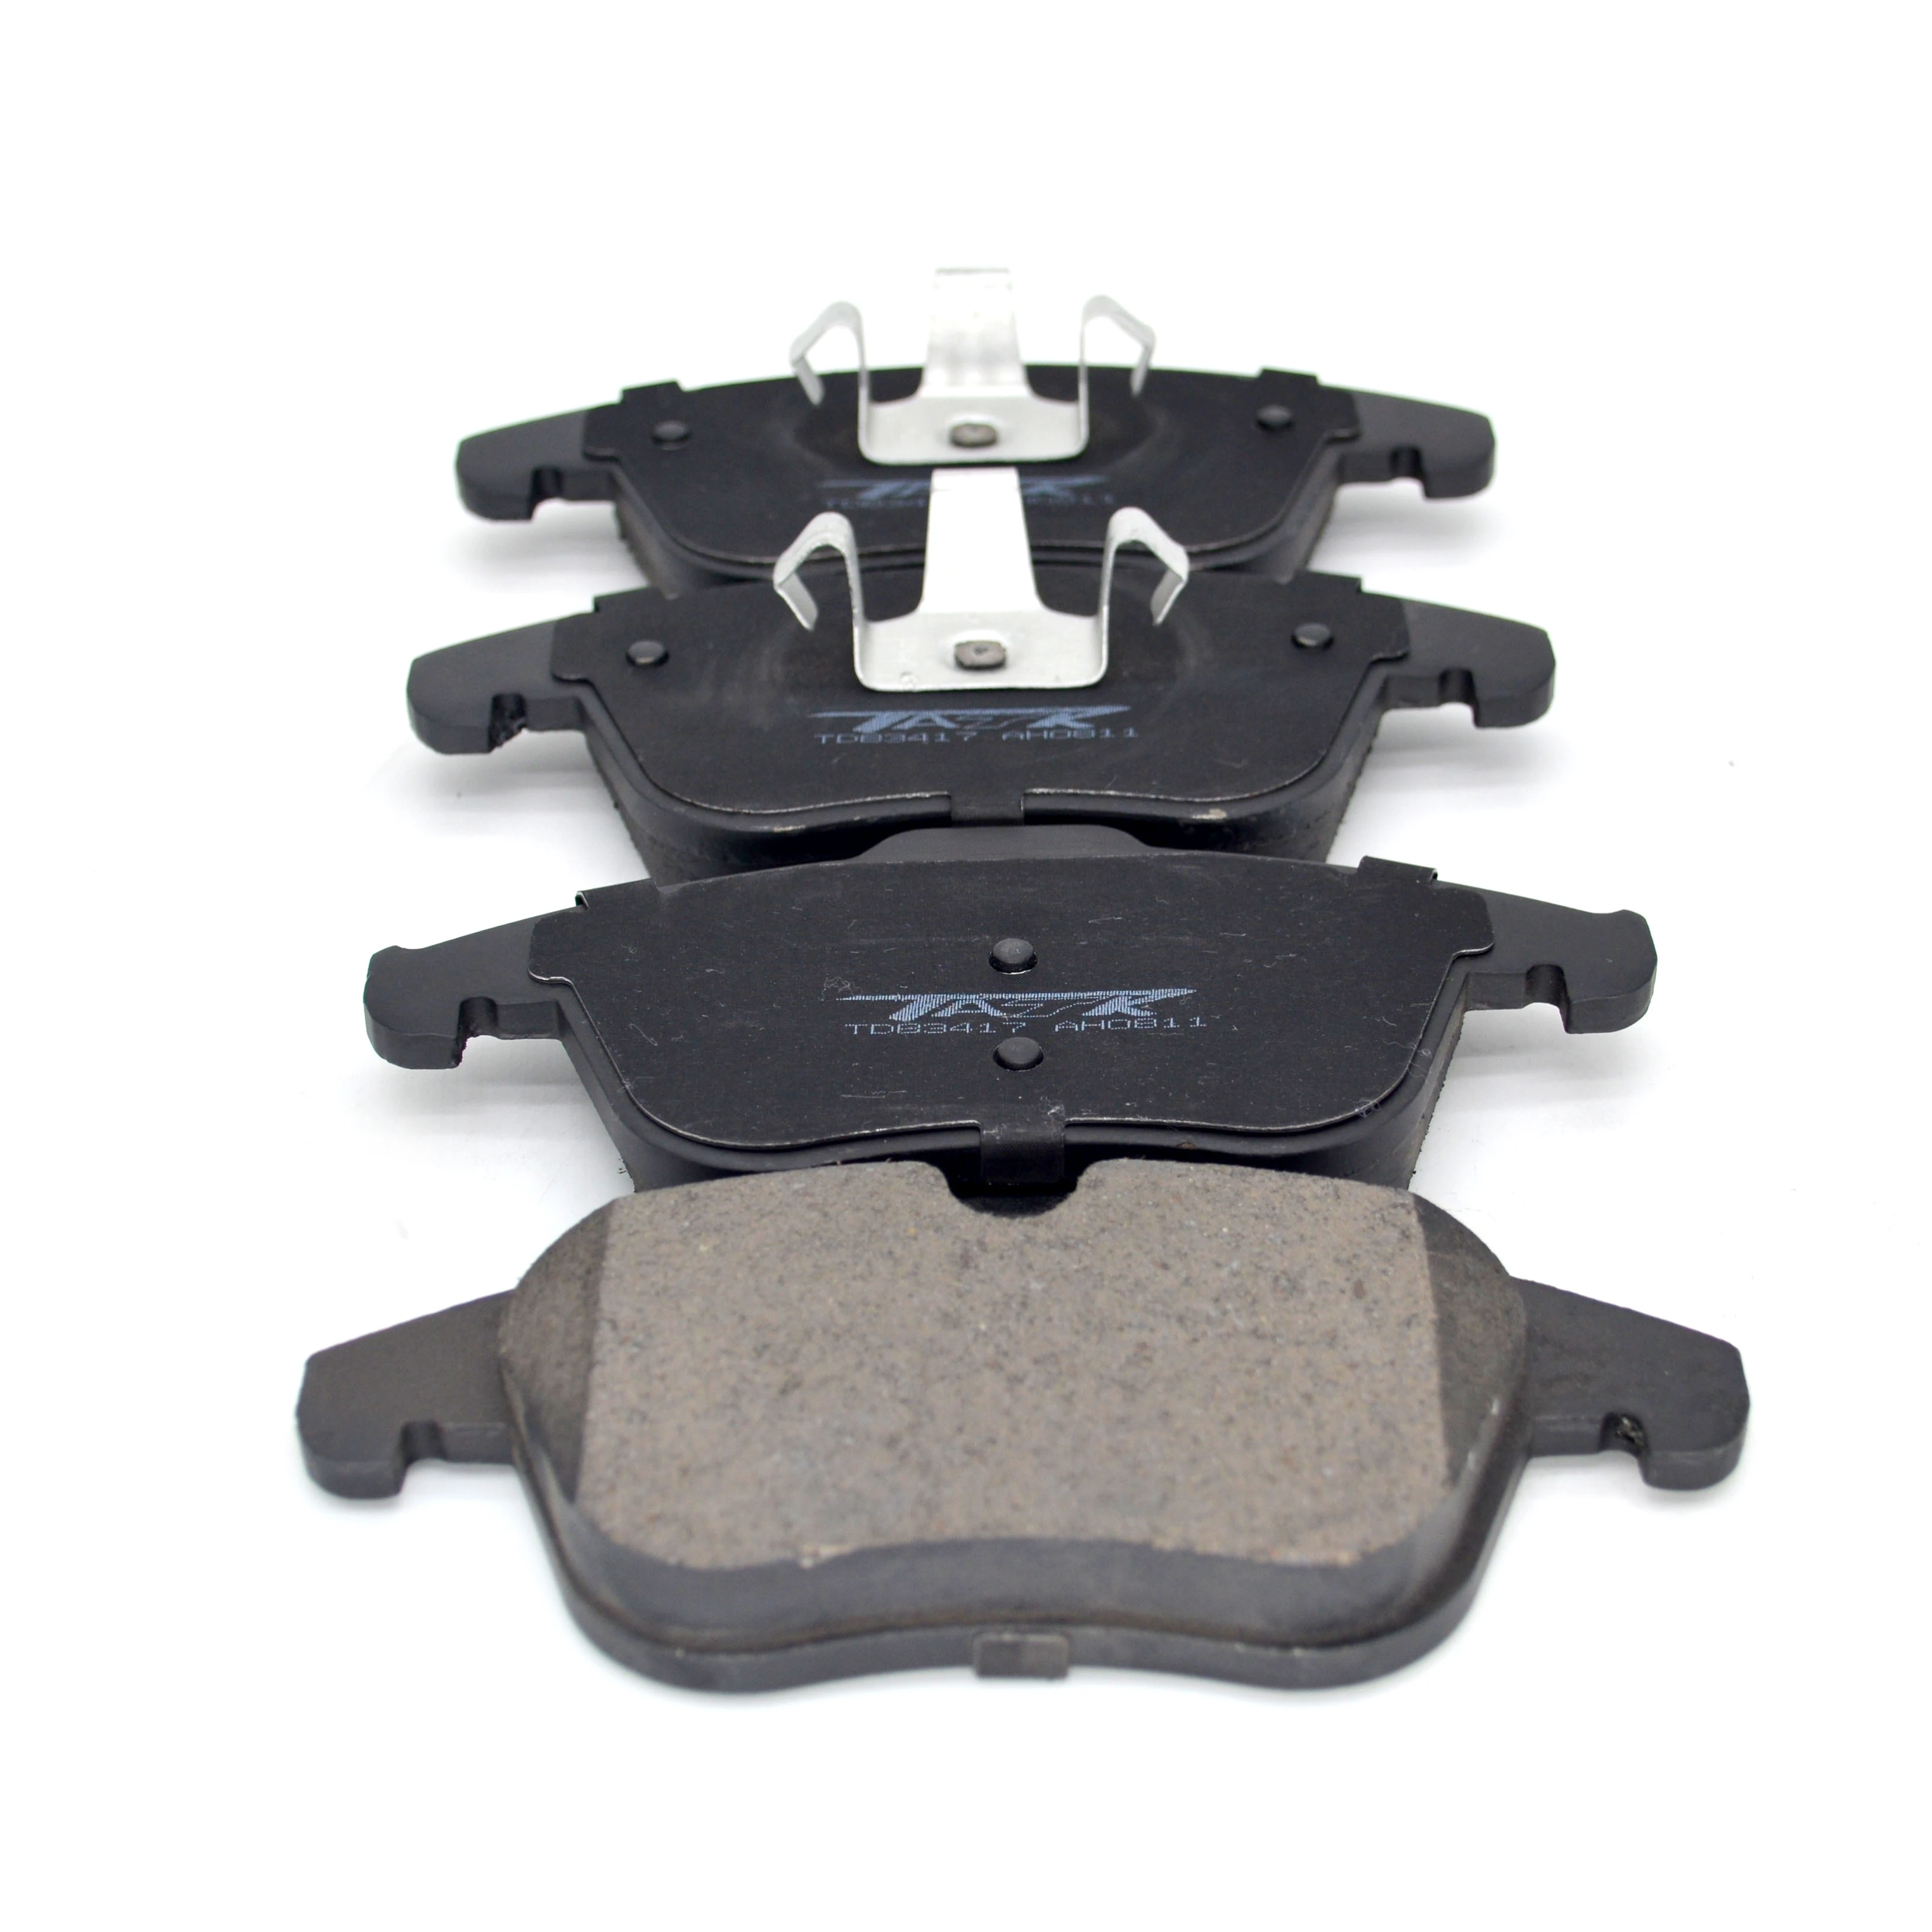 China Factory High Quality Auto brakepads Ceramic Front Brake Pad For Citroen C5 III Peugeot 508 407 4254.24 GDB7834